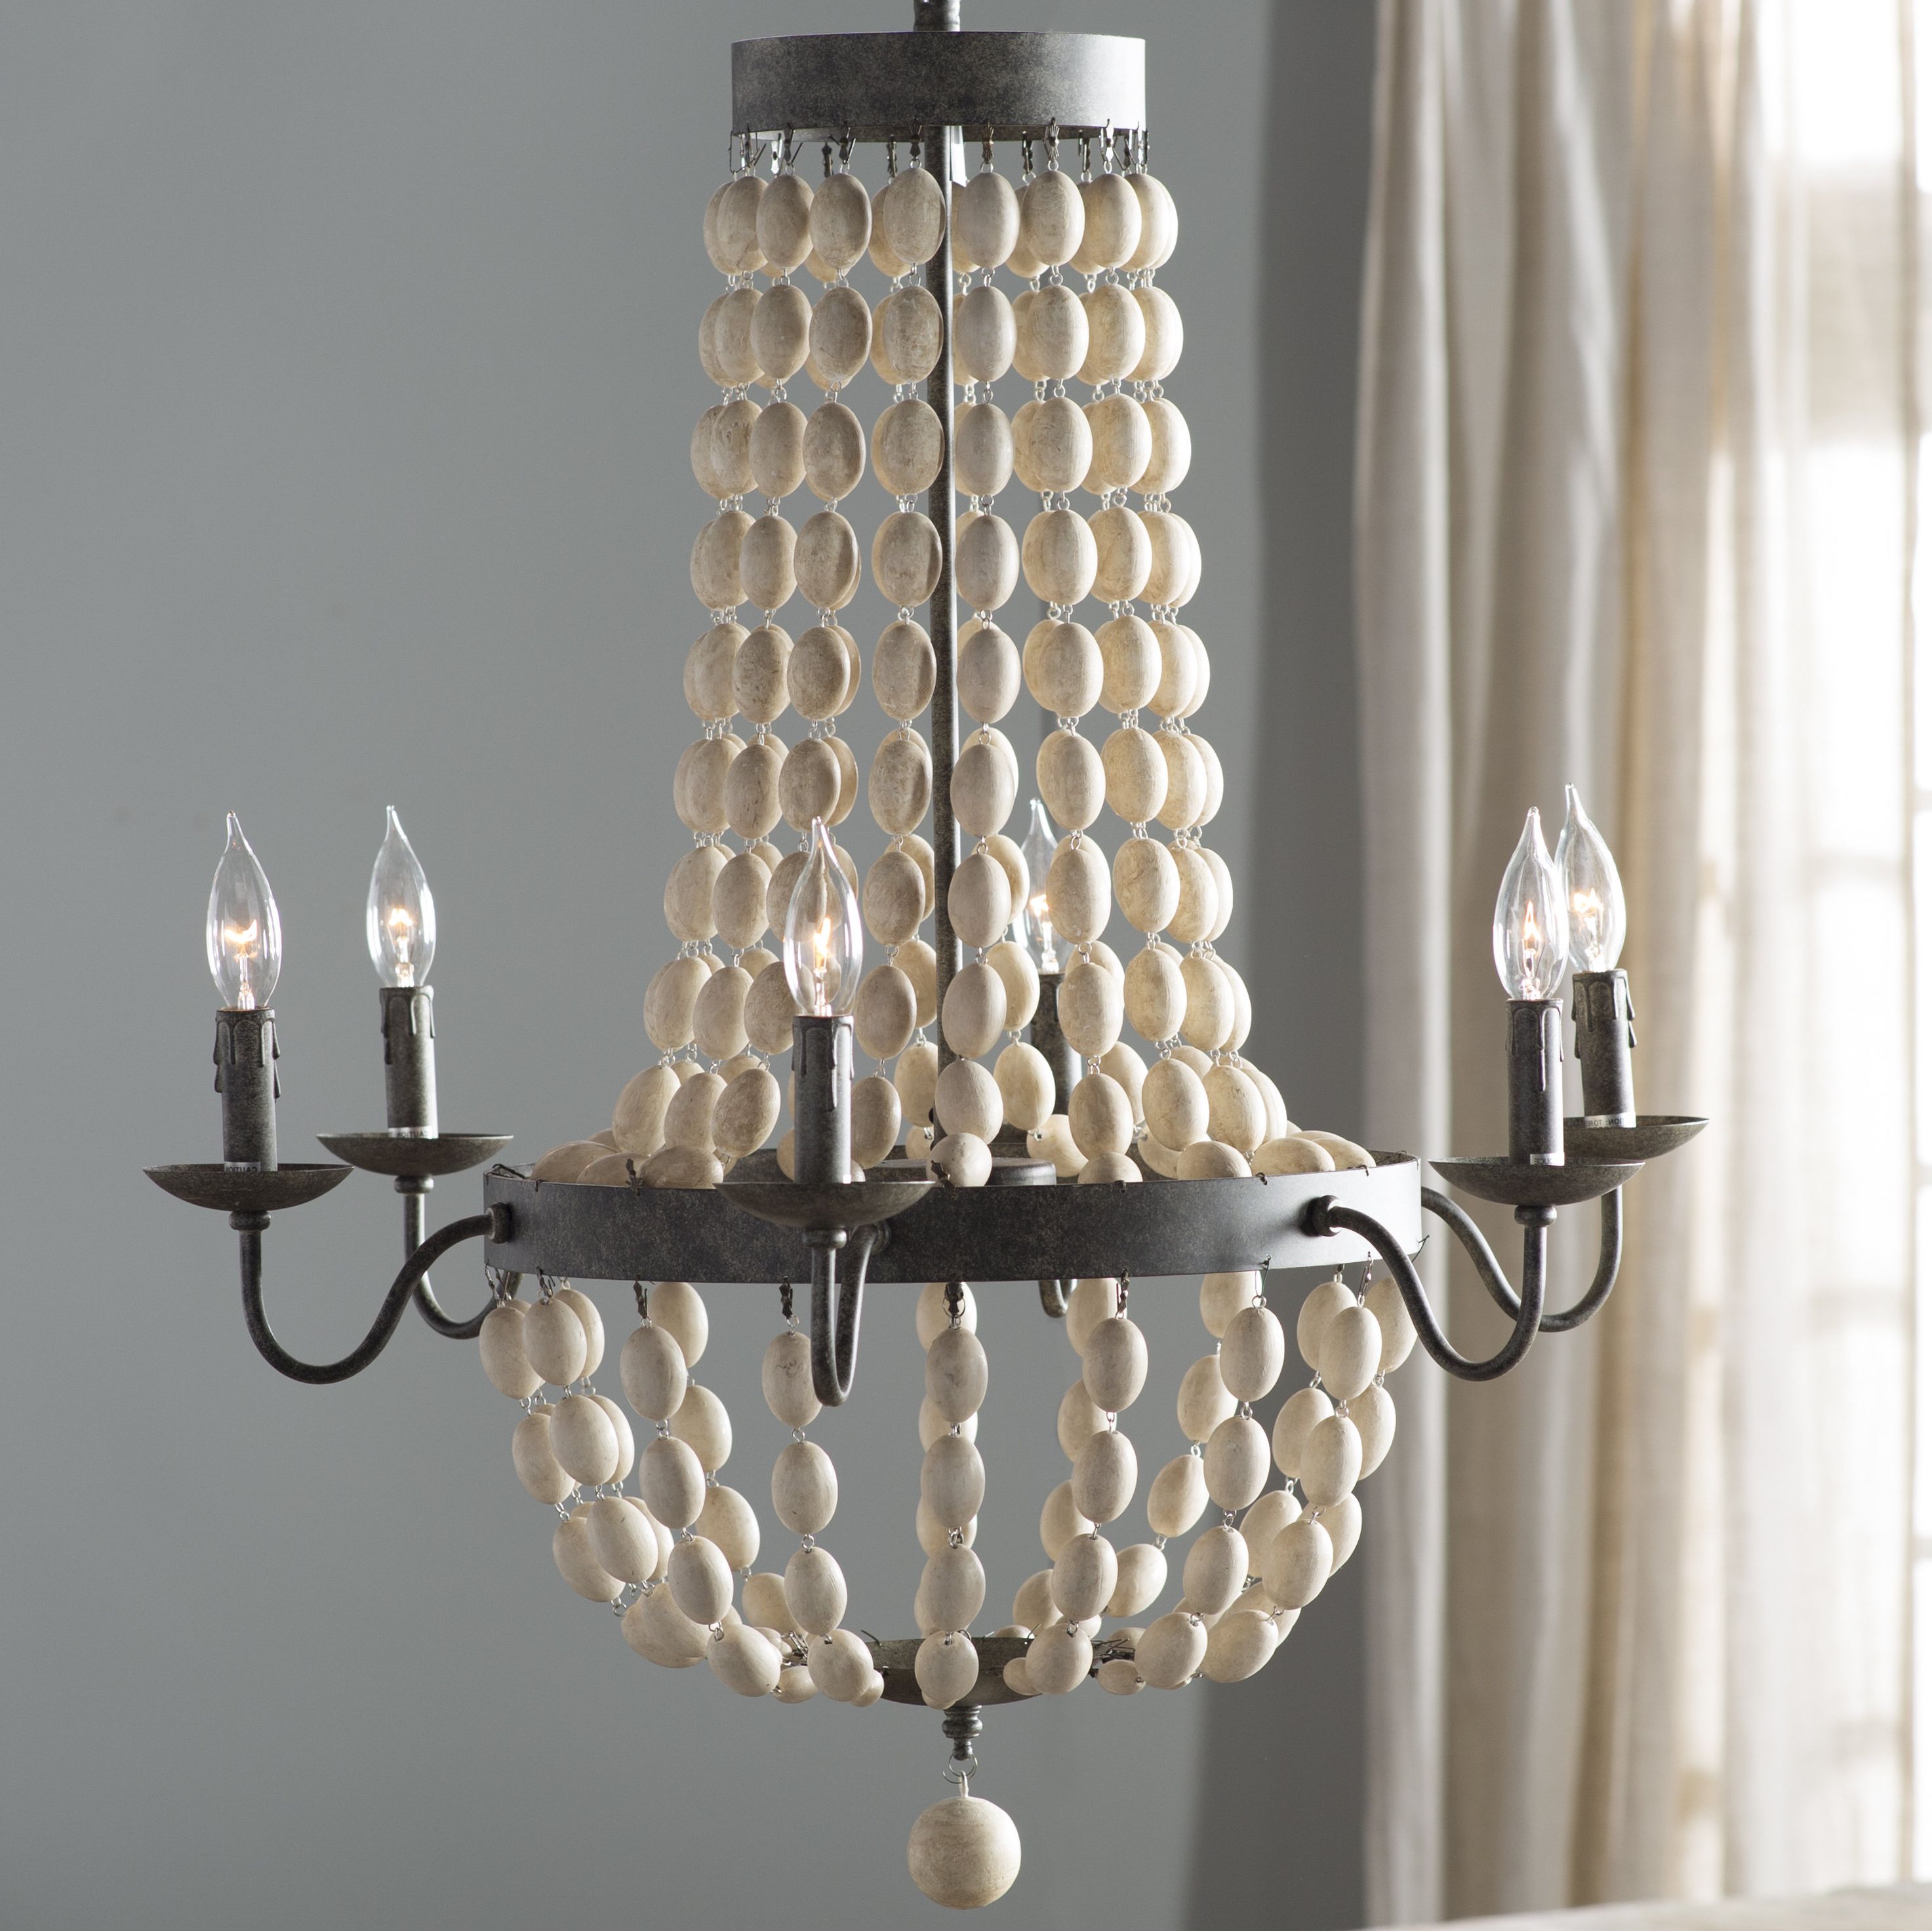 Fashionable Bargas 6 Light Empire Chandelier Inside Ladonna 5 Light Novelty Chandeliers (View 16 of 20)